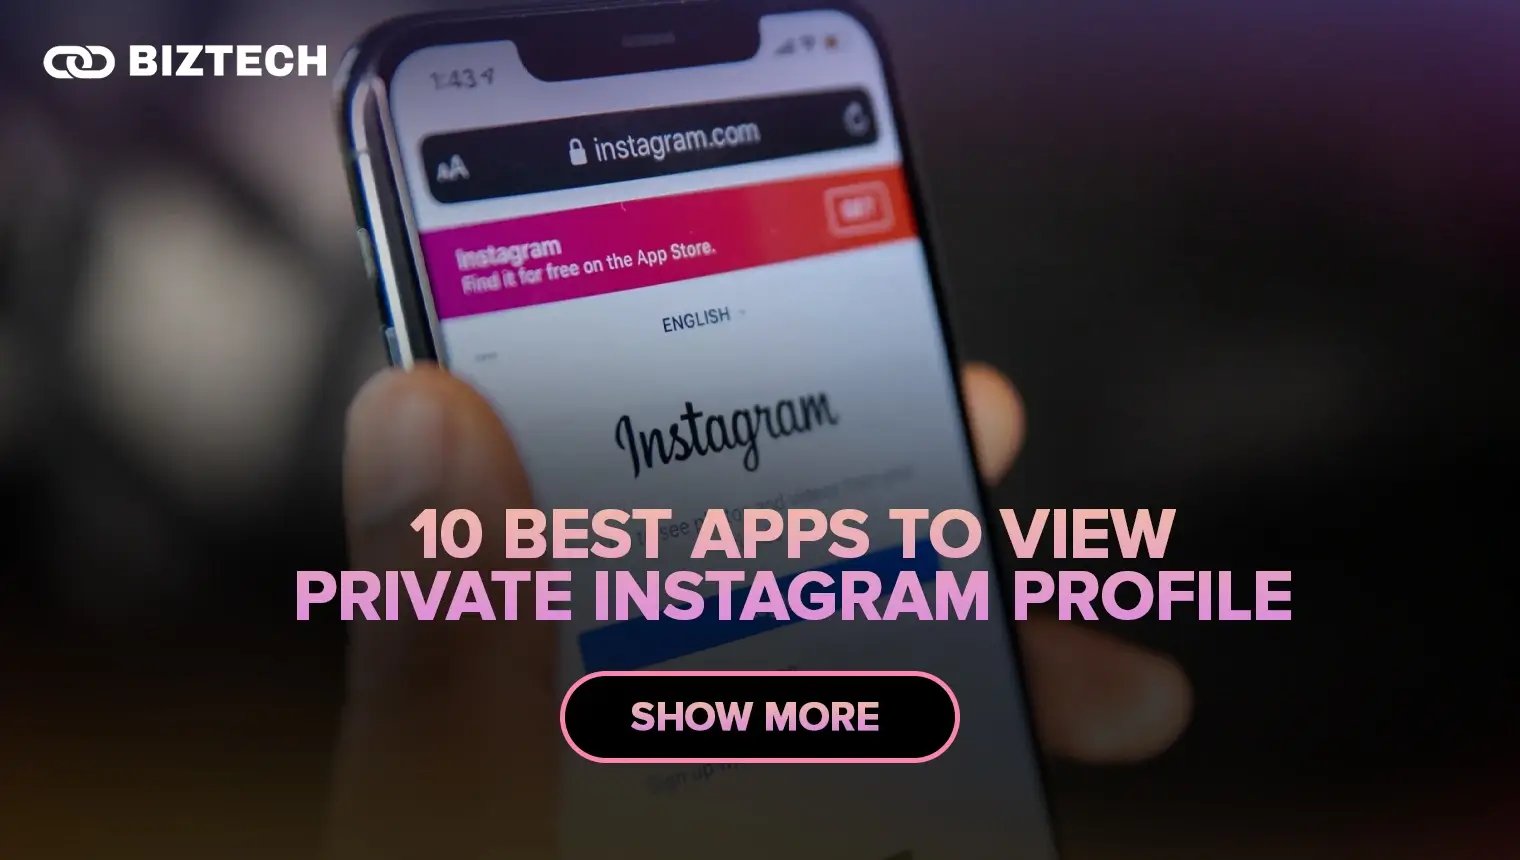 10 Best Apps to View Private Instagram Profile